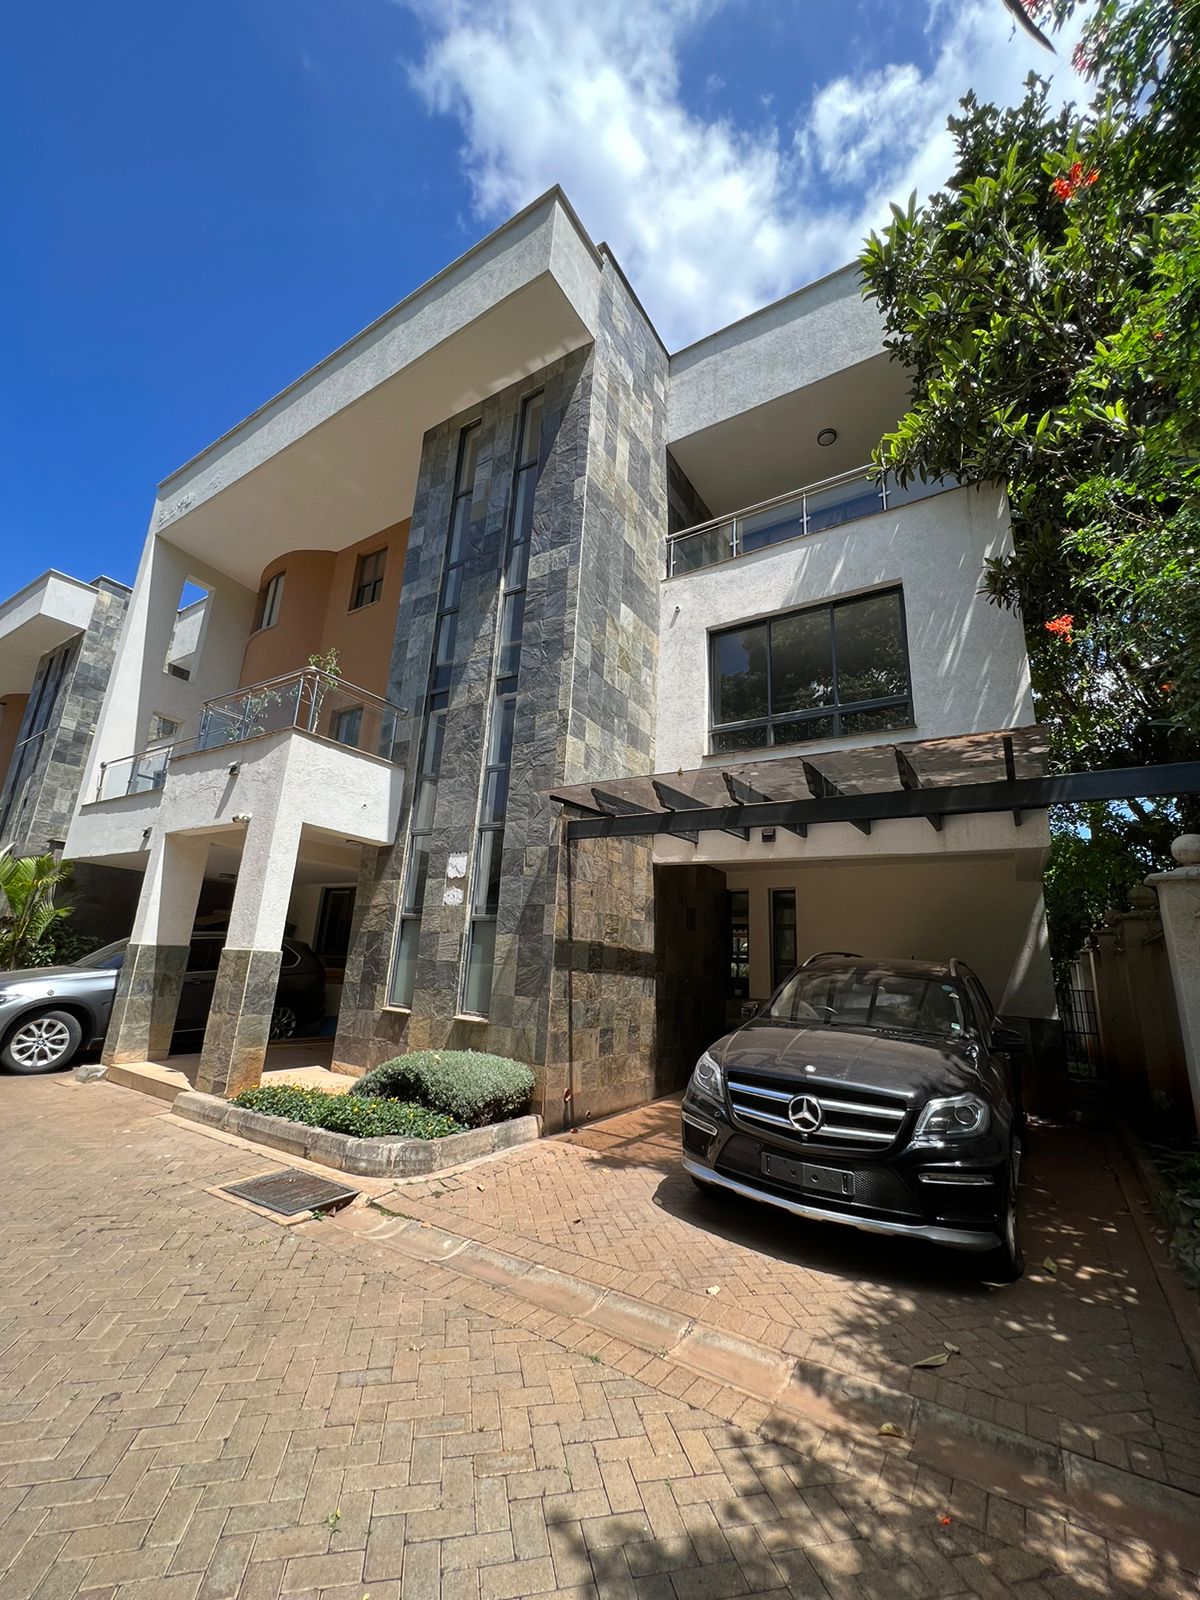 5 bedroom townhouses plus sq for rent and sale in the leafy suburb of lavington area. Musilli Homes